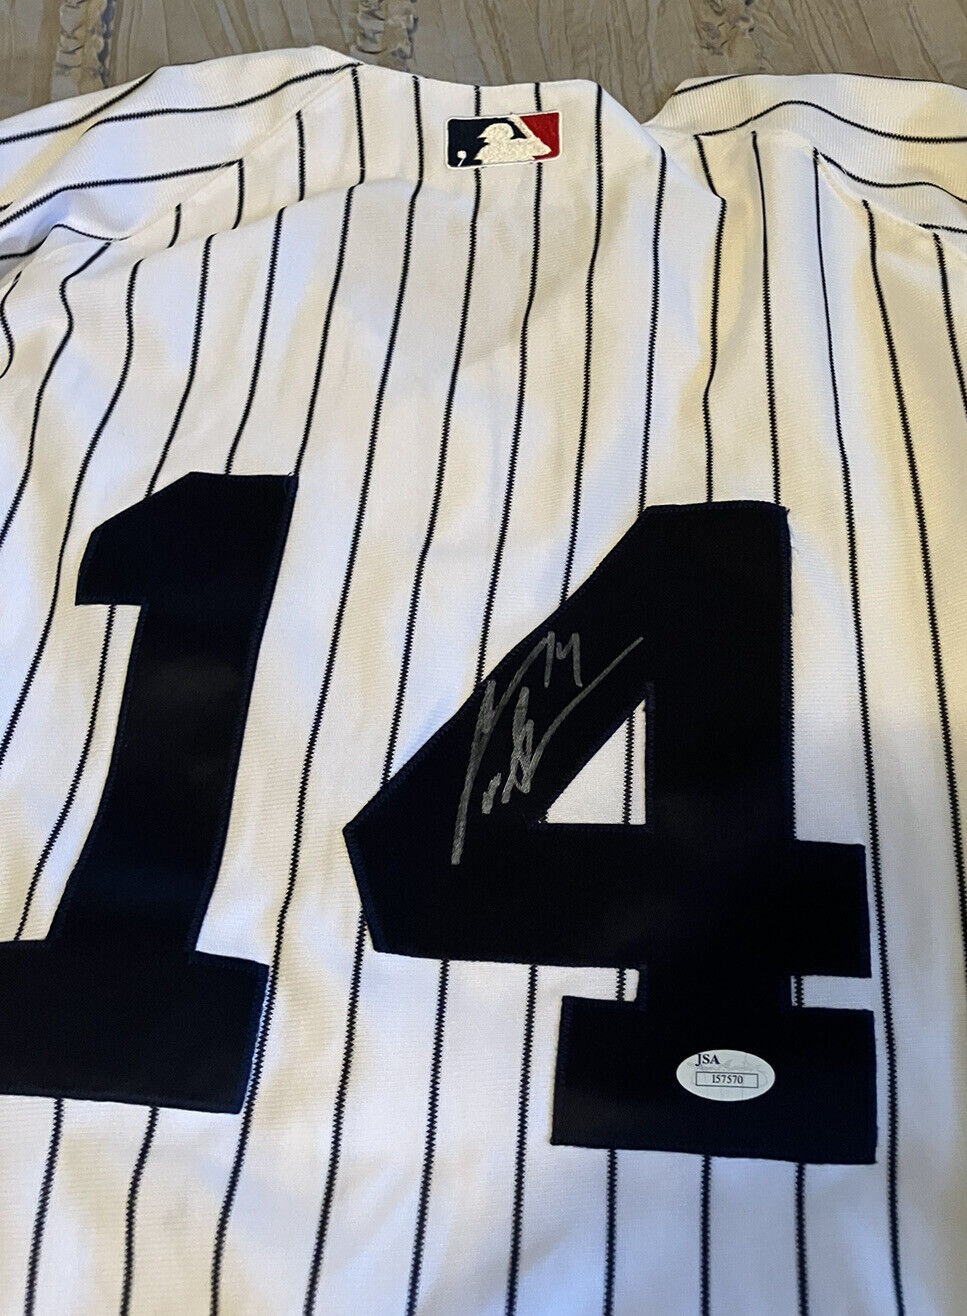 CURTIS GRANDERSON New York YANKEES Baseball MAJESTIC Size 50 Jersey SIGNED